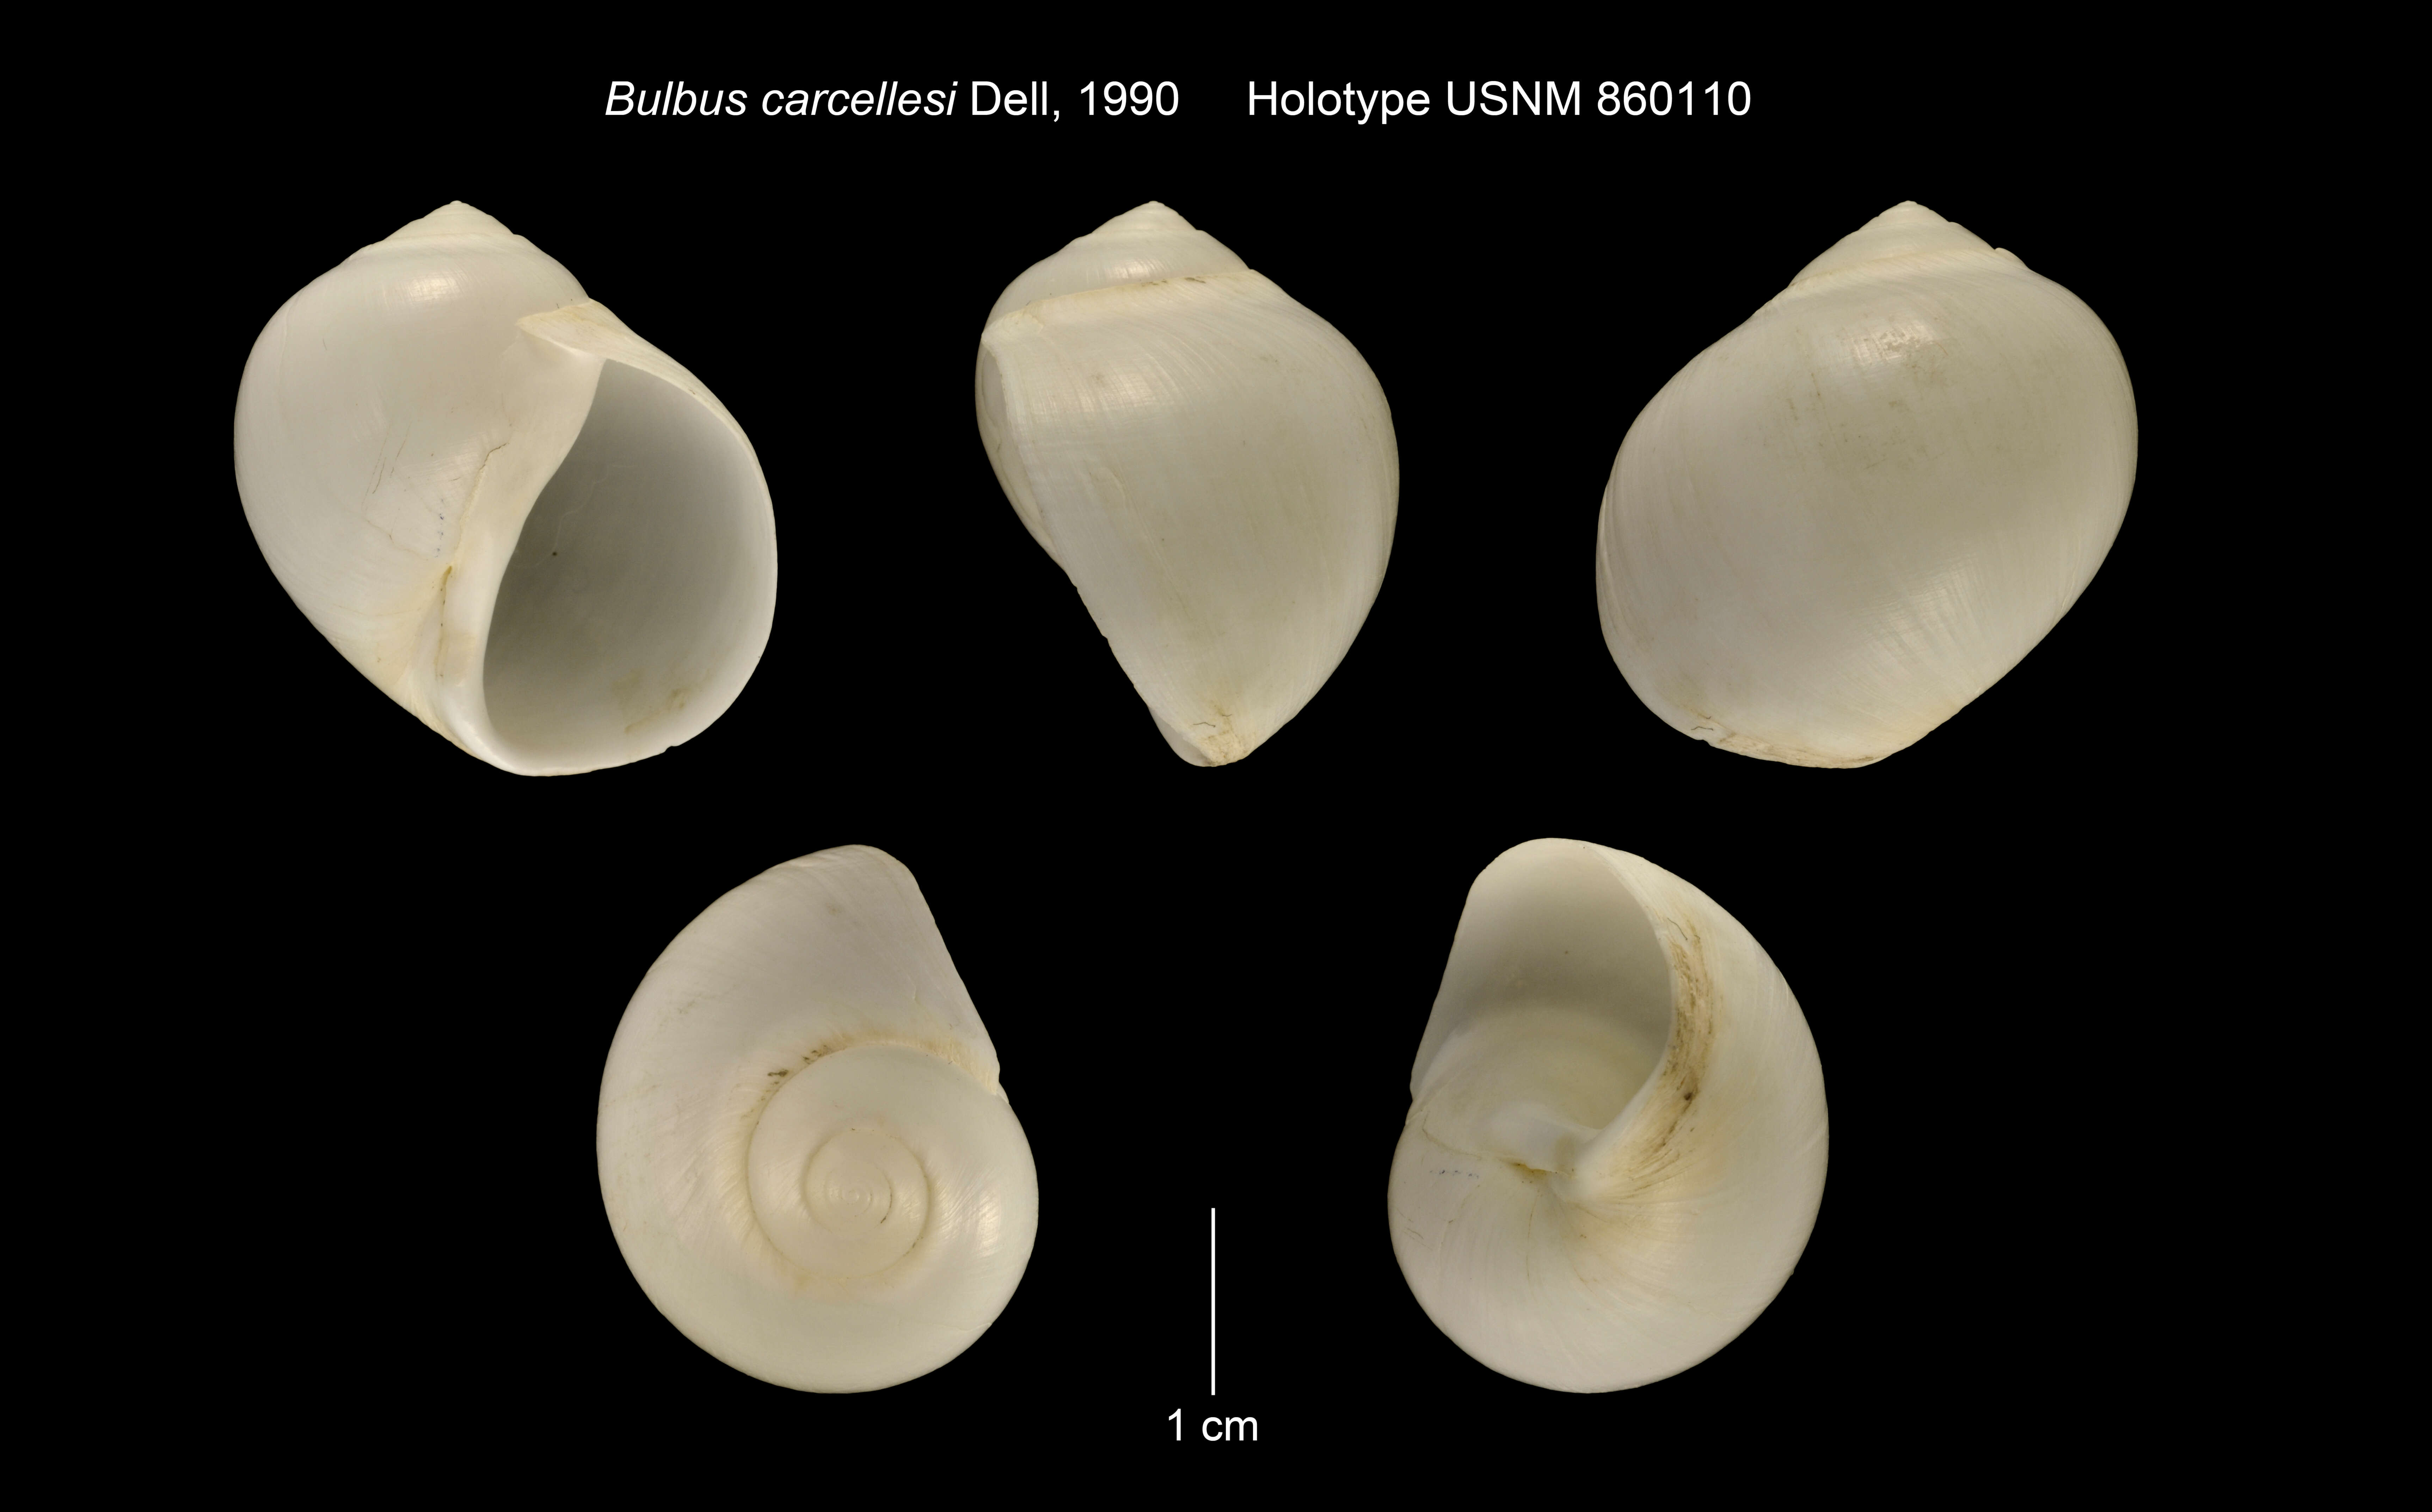 Image of Bulbus carcellesi Dell 1990